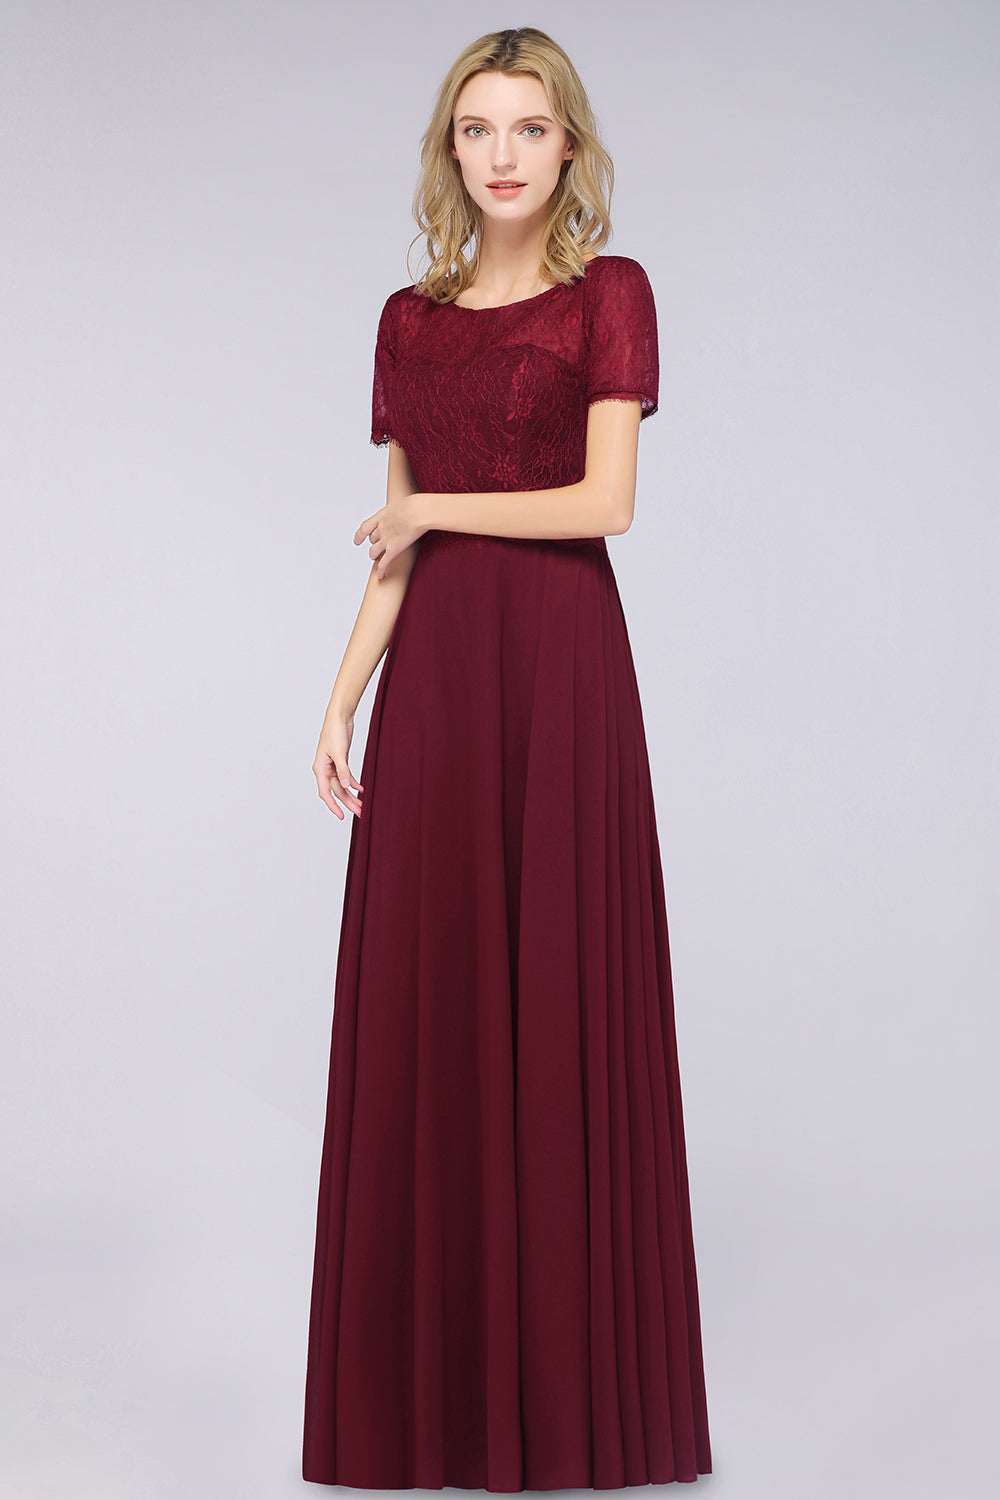 Chic Lace Long Burgundy Backless Bridesmaid Dress With Short-Sleeves